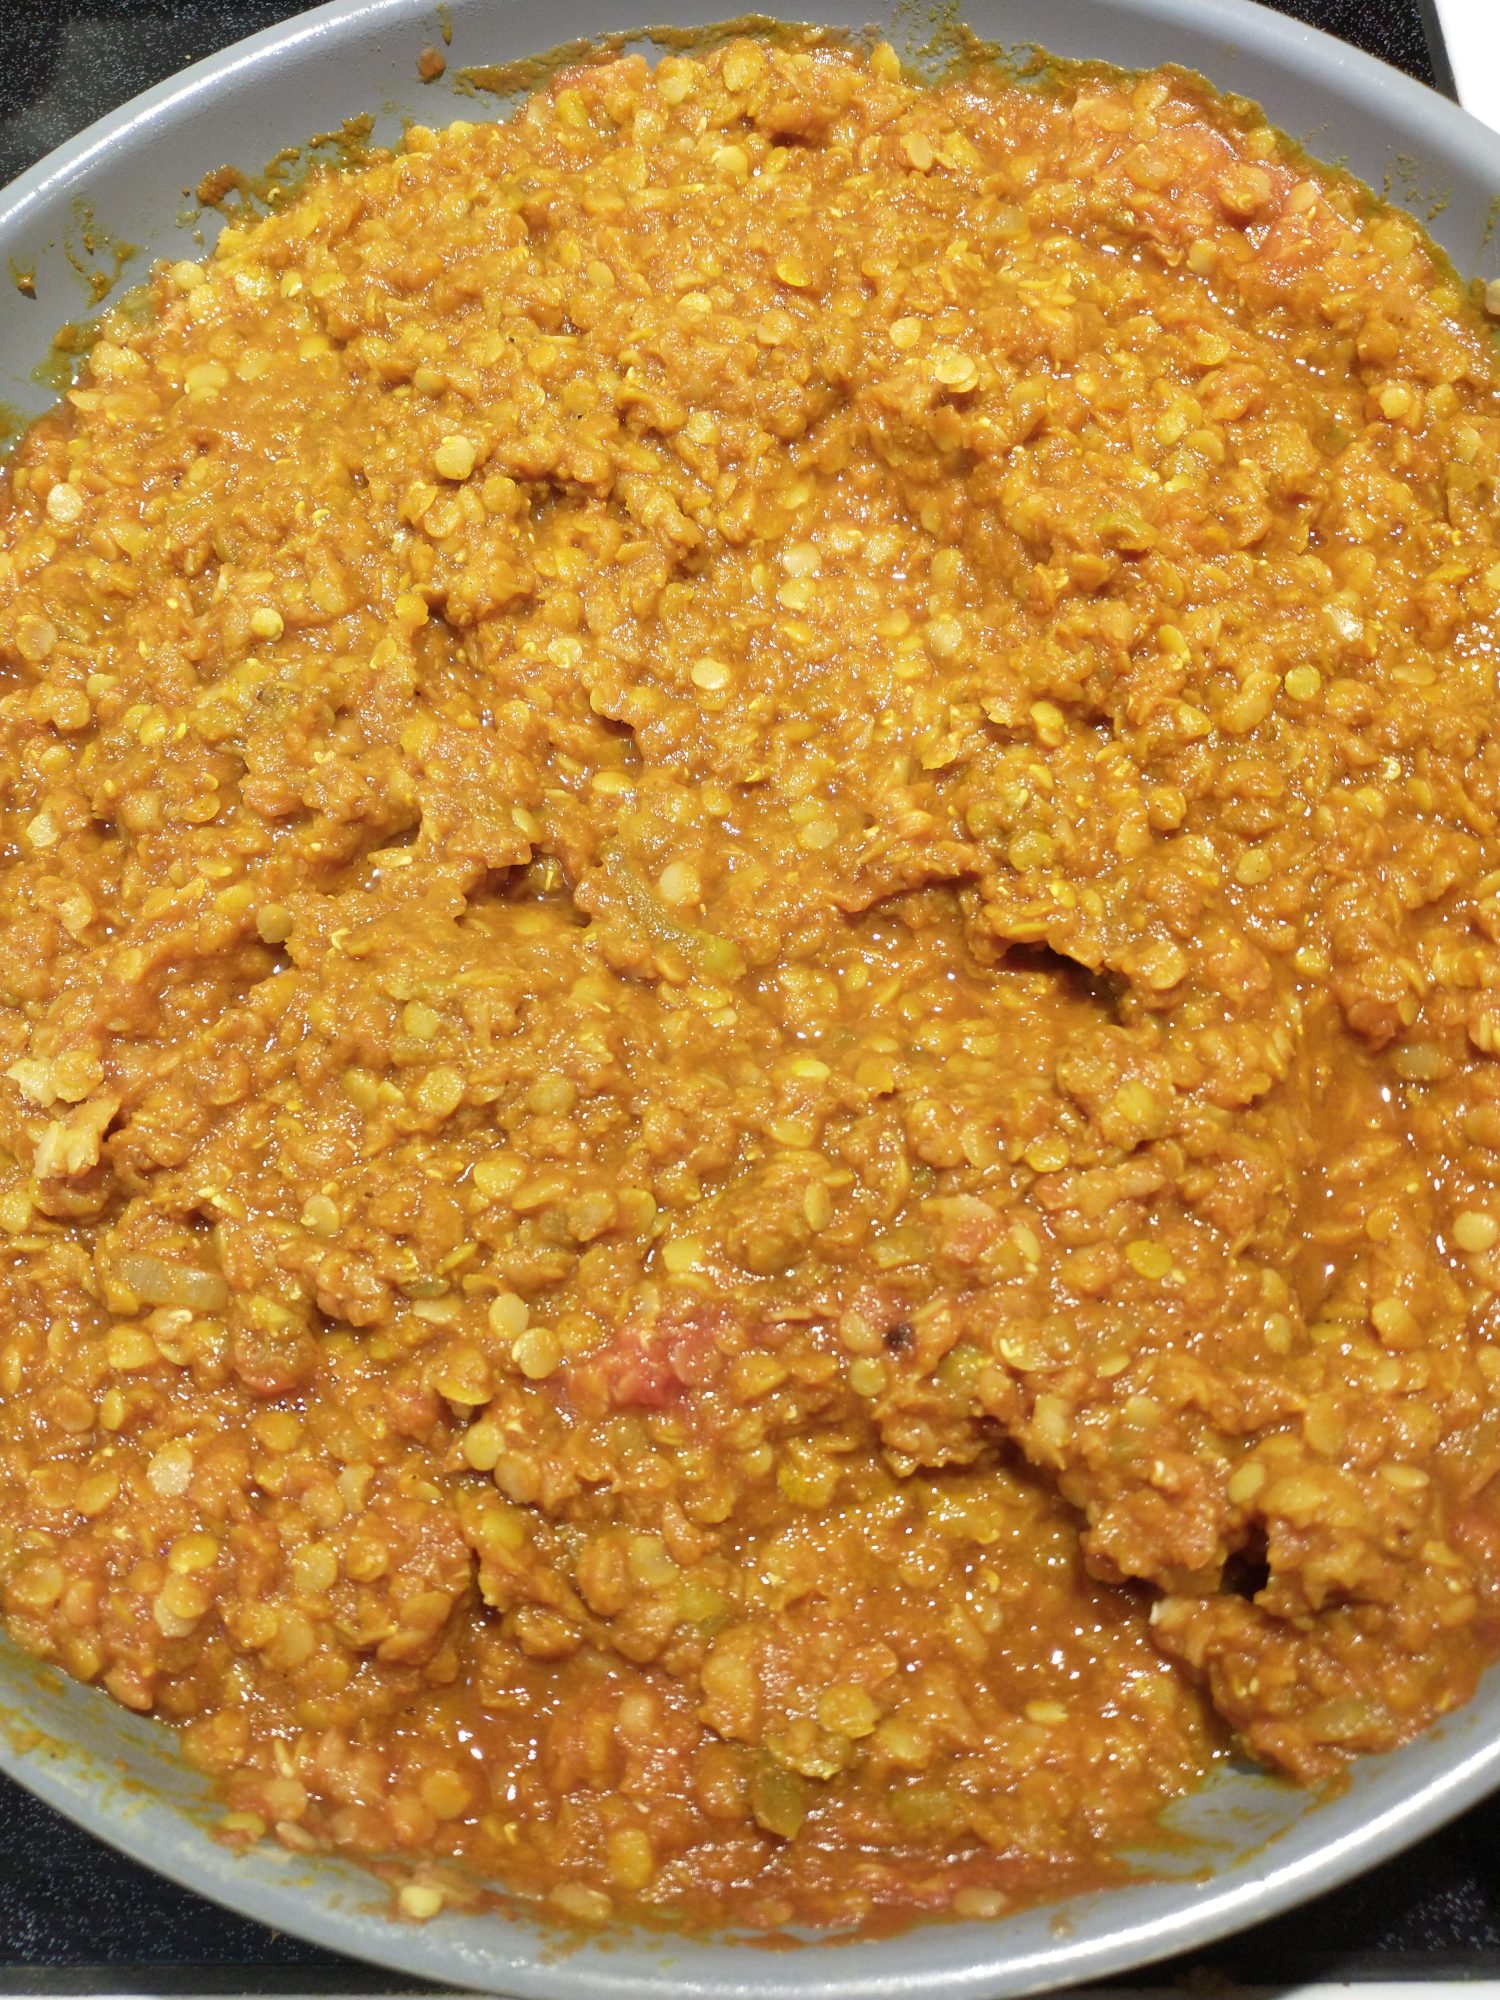 Image shows a pan of the red lentil curry described in this recipe. The lentils appear as red-yellow dots on a darker background of the same hue.